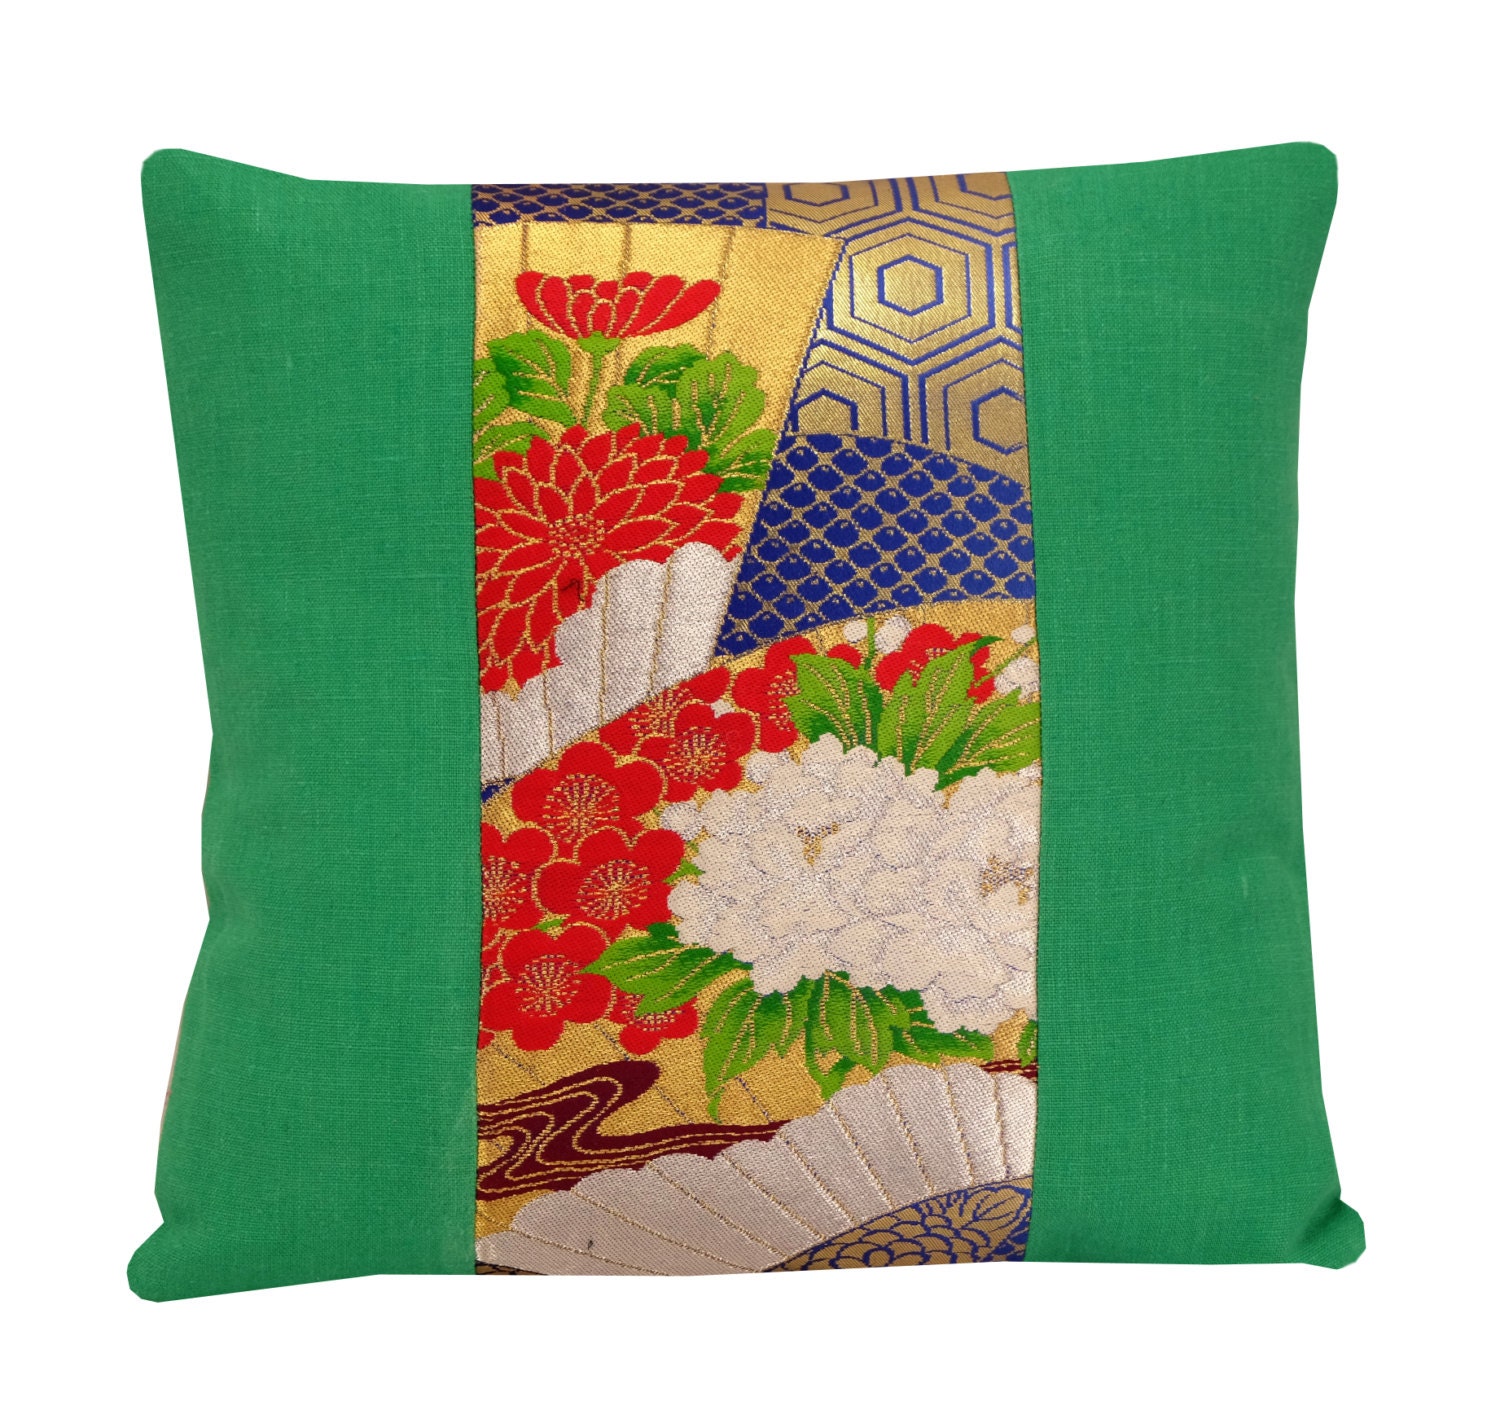 Bright Oriental Pillow Cover 14x14 36x36cm by Diversecushions